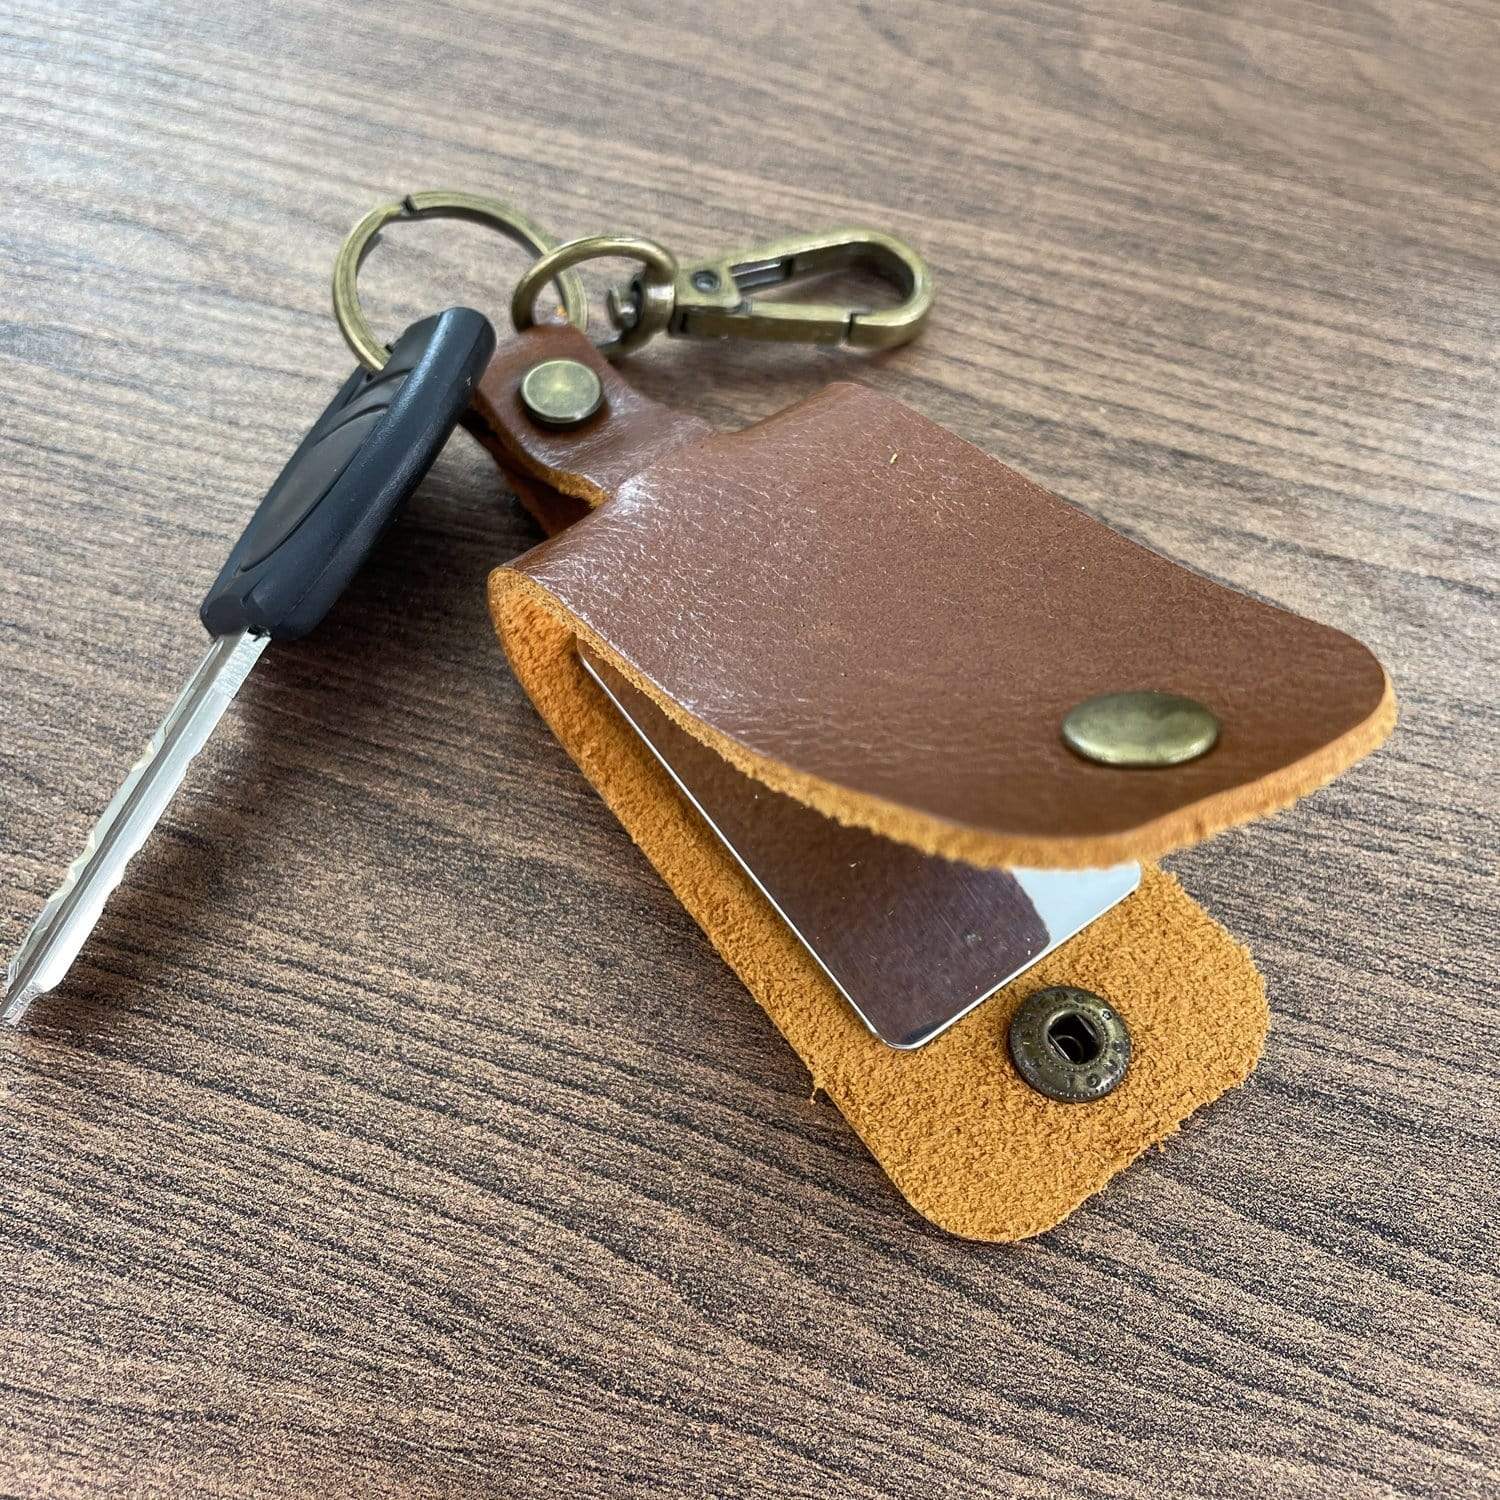 Keychains To Our Son - Challenges With Confidence Leather Customized Keychain GiveMe-Gifts